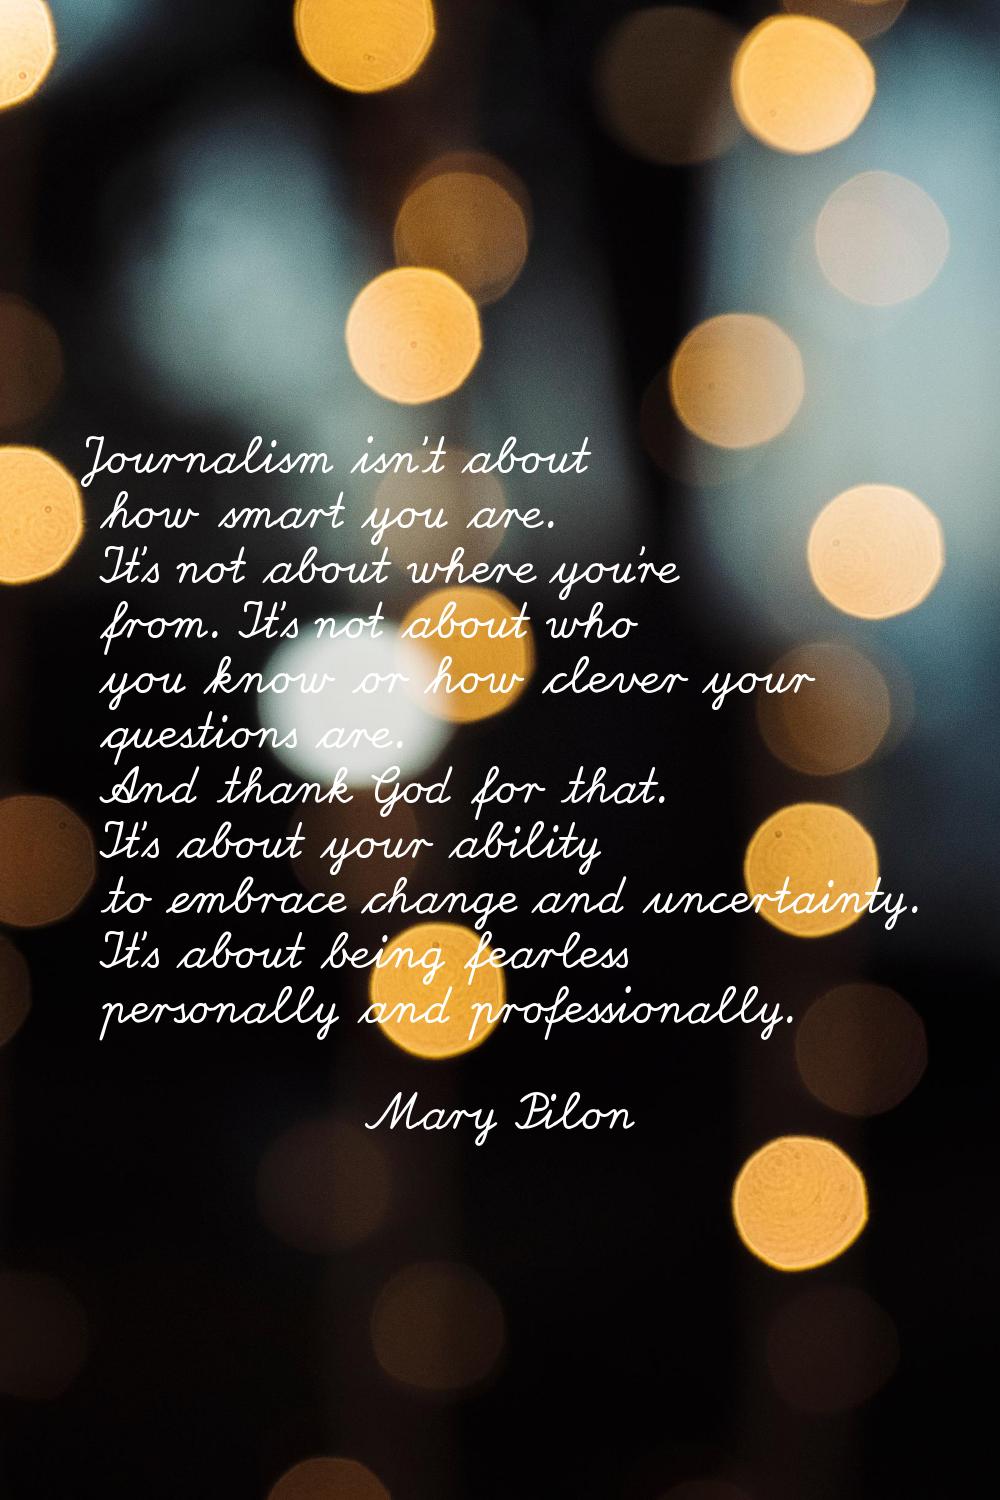 Journalism isn't about how smart you are. It's not about where you're from. It's not about who you 